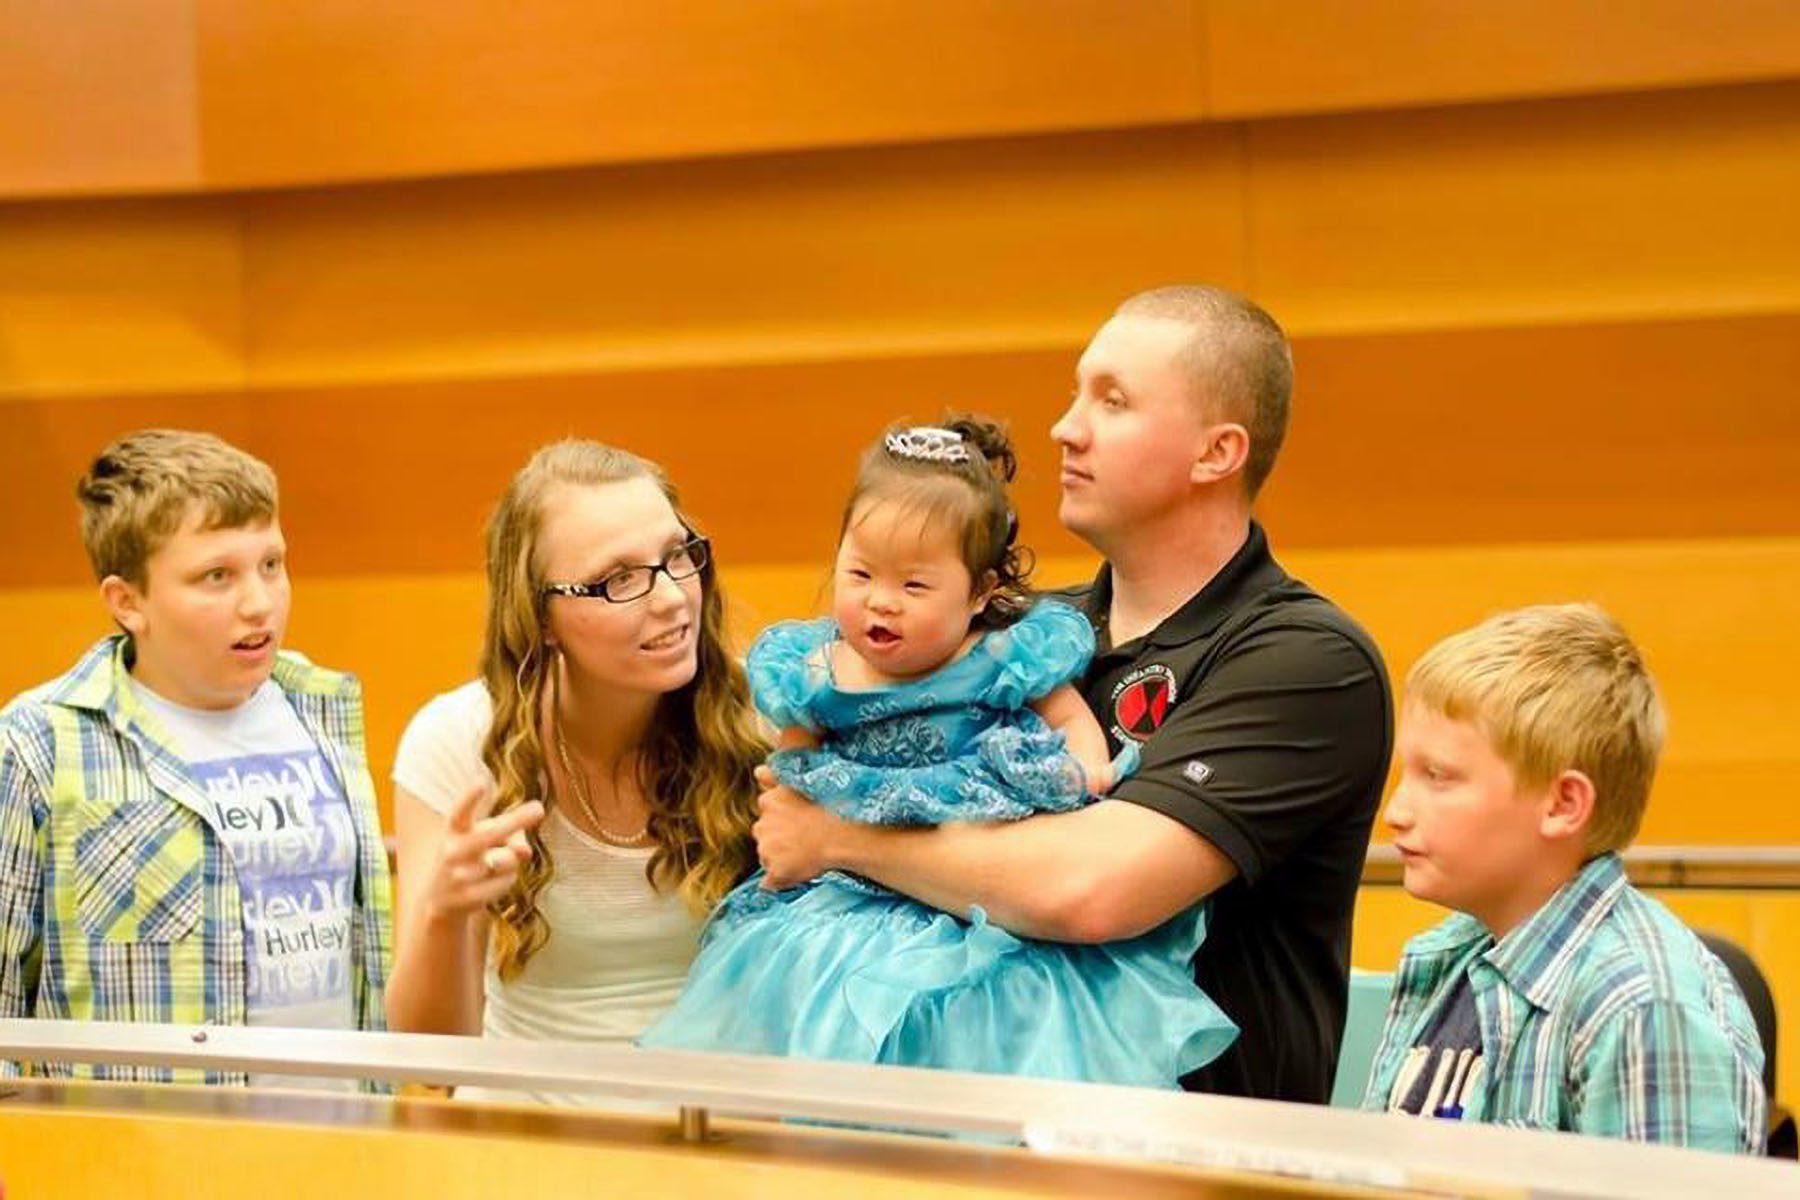 Austin Carrigg and her family are seen sitting down at adoption court. Carrigg's husband holds their young adopted daughter. The adopted daughter wears a princess dress and a small tiara and is smiling.